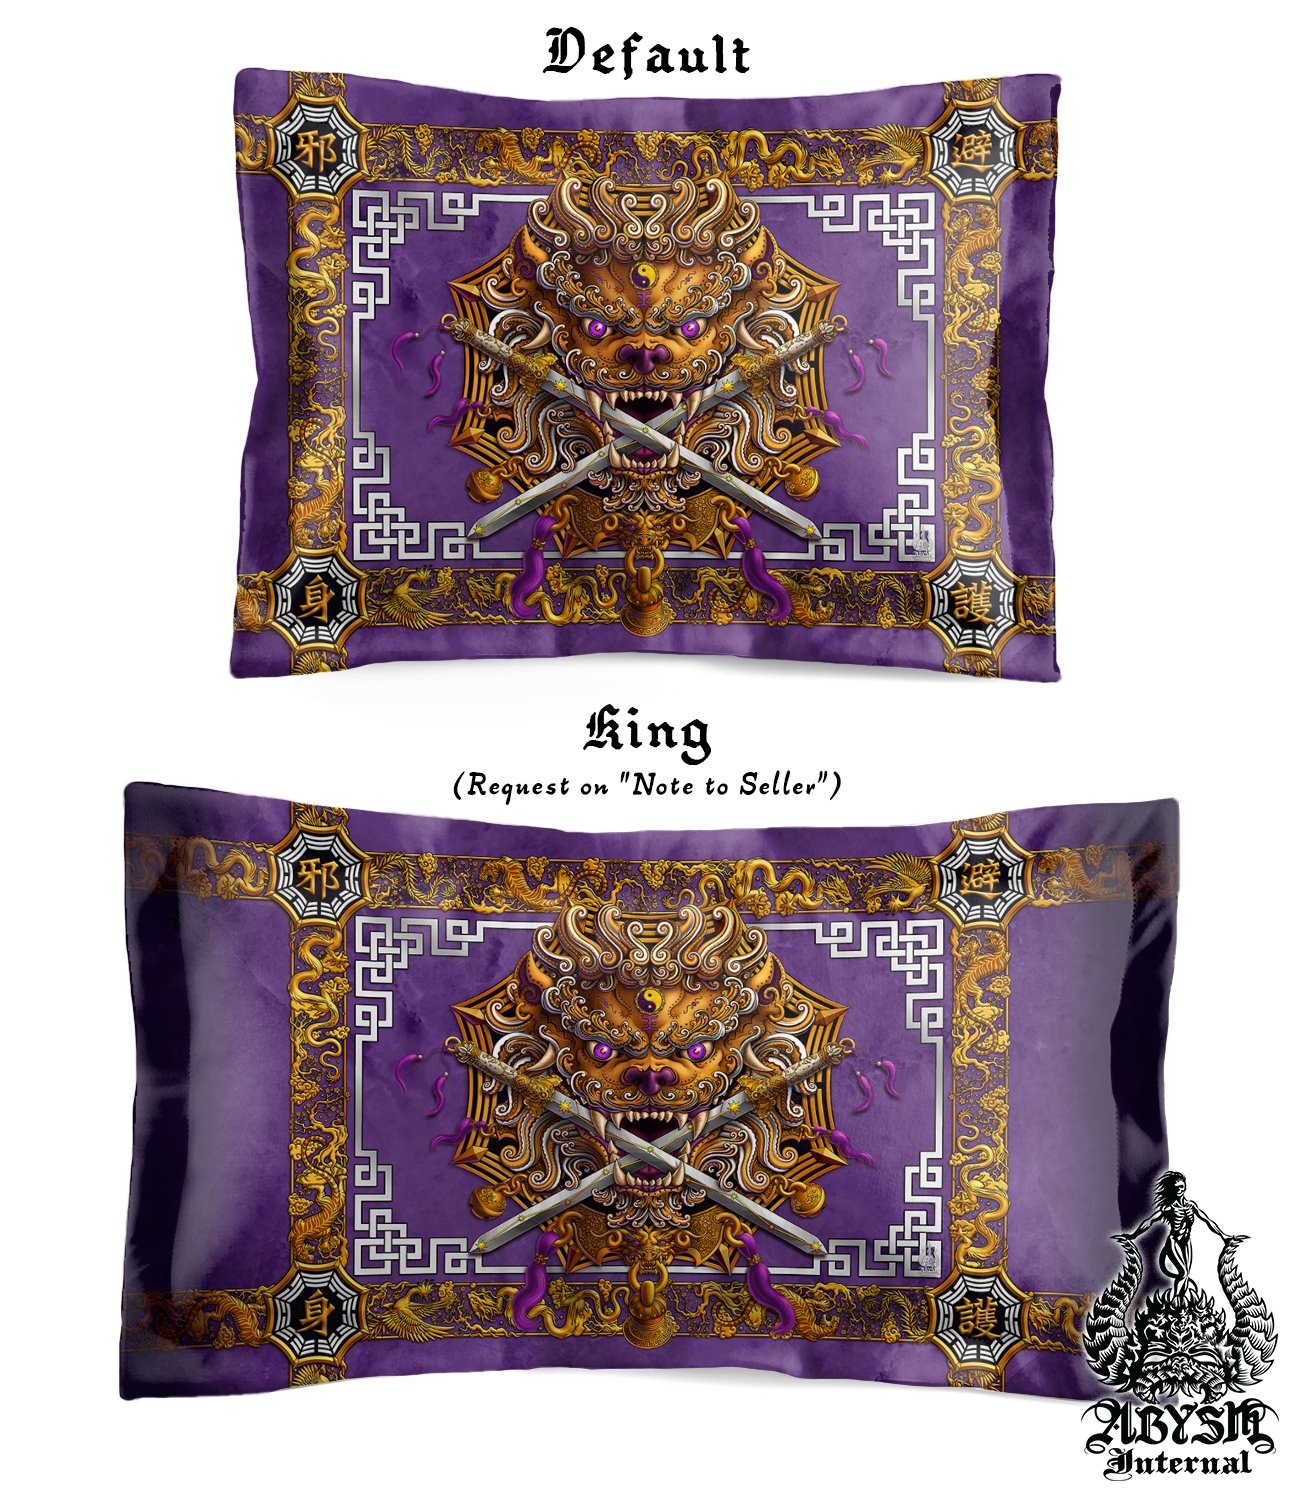 Asian Lion Bedding Set, Comforter and Duvet, Taiwan Sword Lion, Chinese Bed Cover, Gamer Bedroom, Indie Decor, King, Queen and Twin Size - Purple White & Gold - Abysm Internal